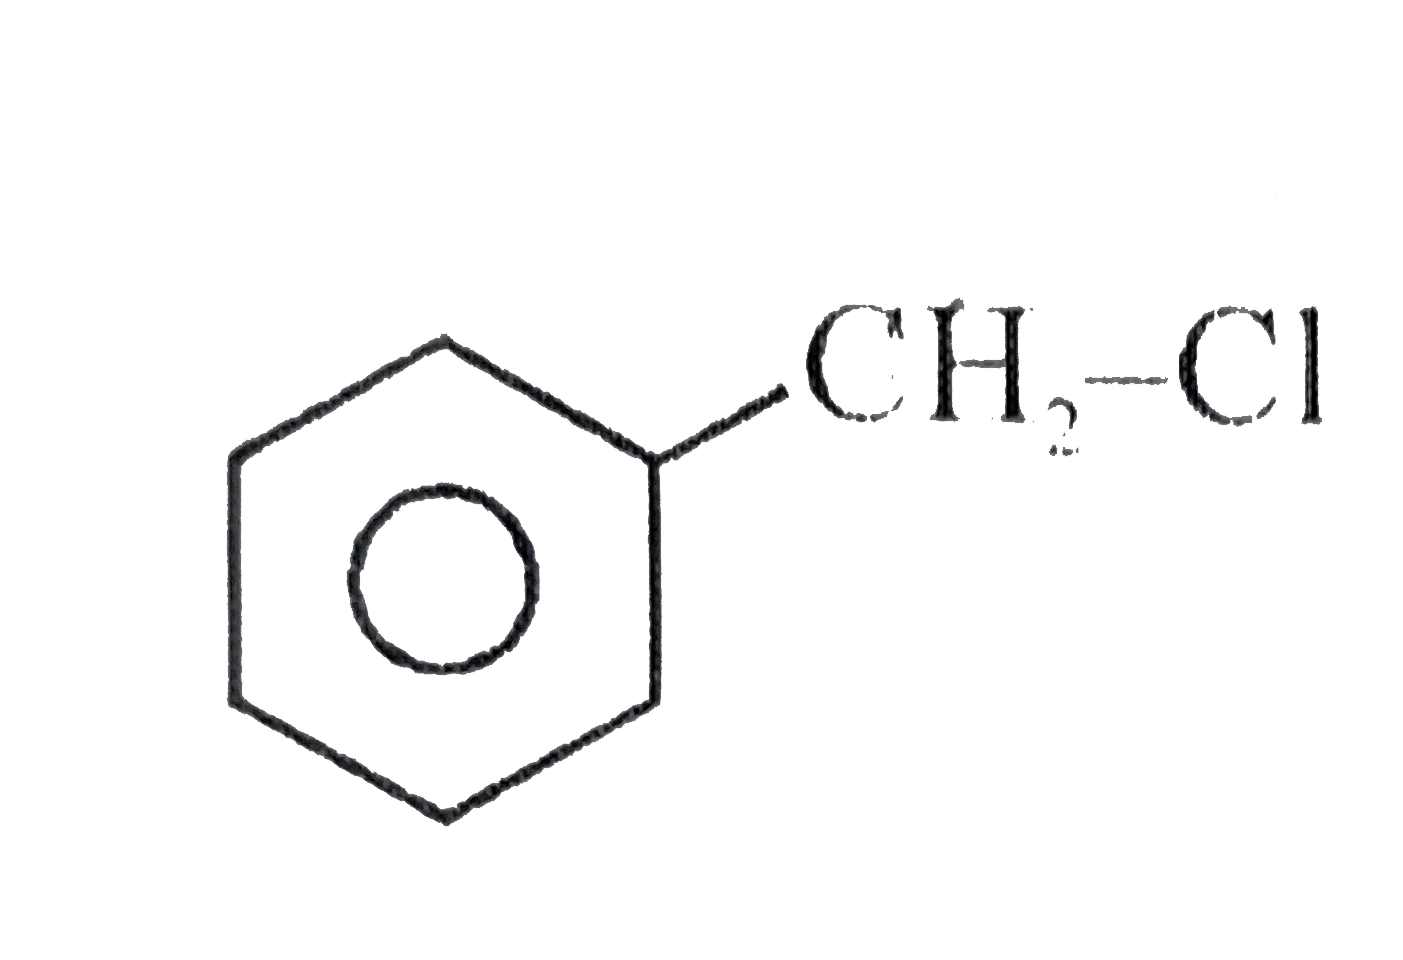 IUPAC name of compound is : -